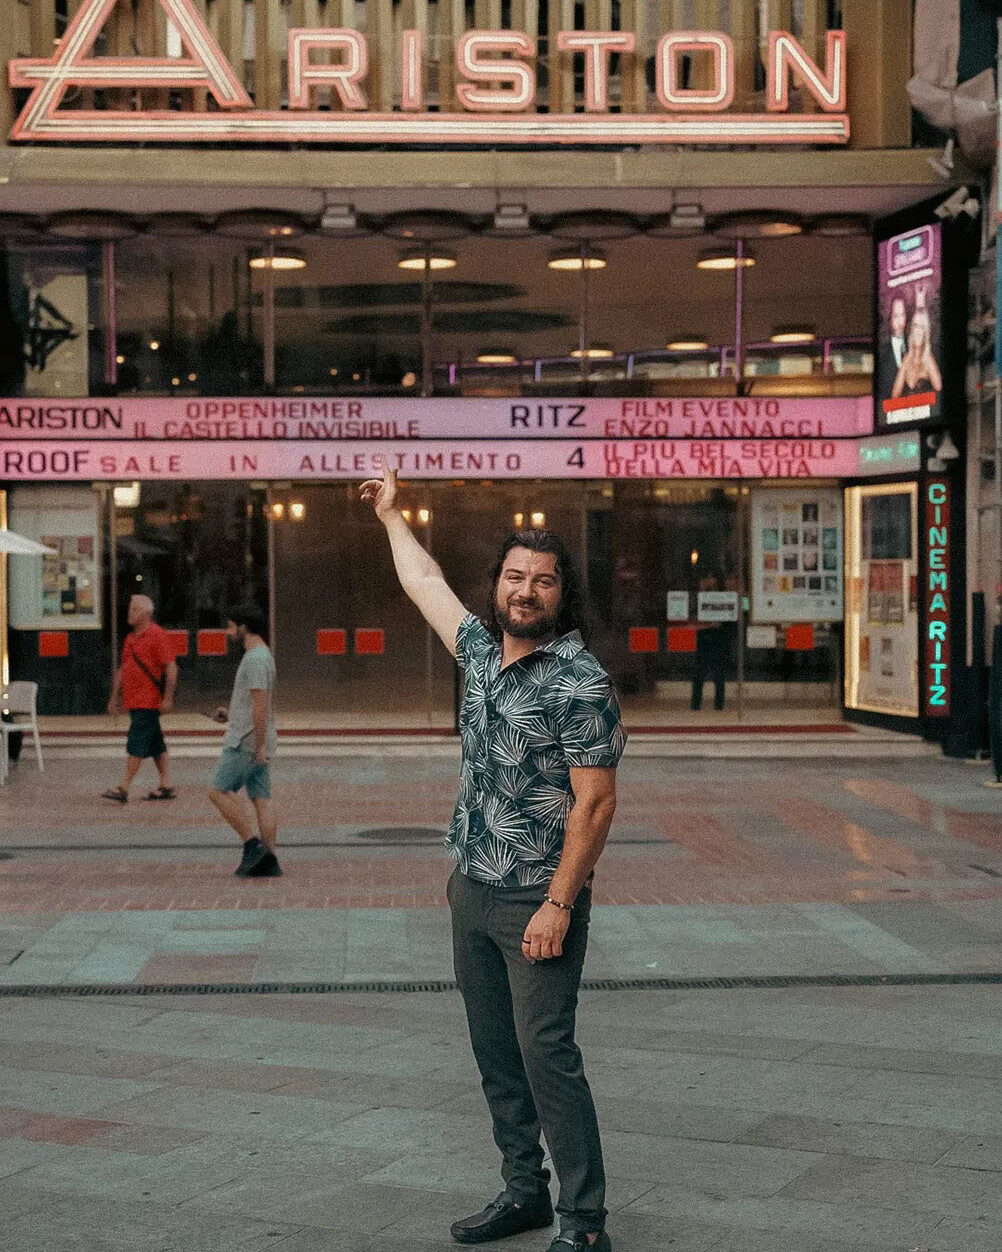 Alex Righetto smiling and pointing upwards in front of the Ariston Theatre's illuminated signboard at dusk